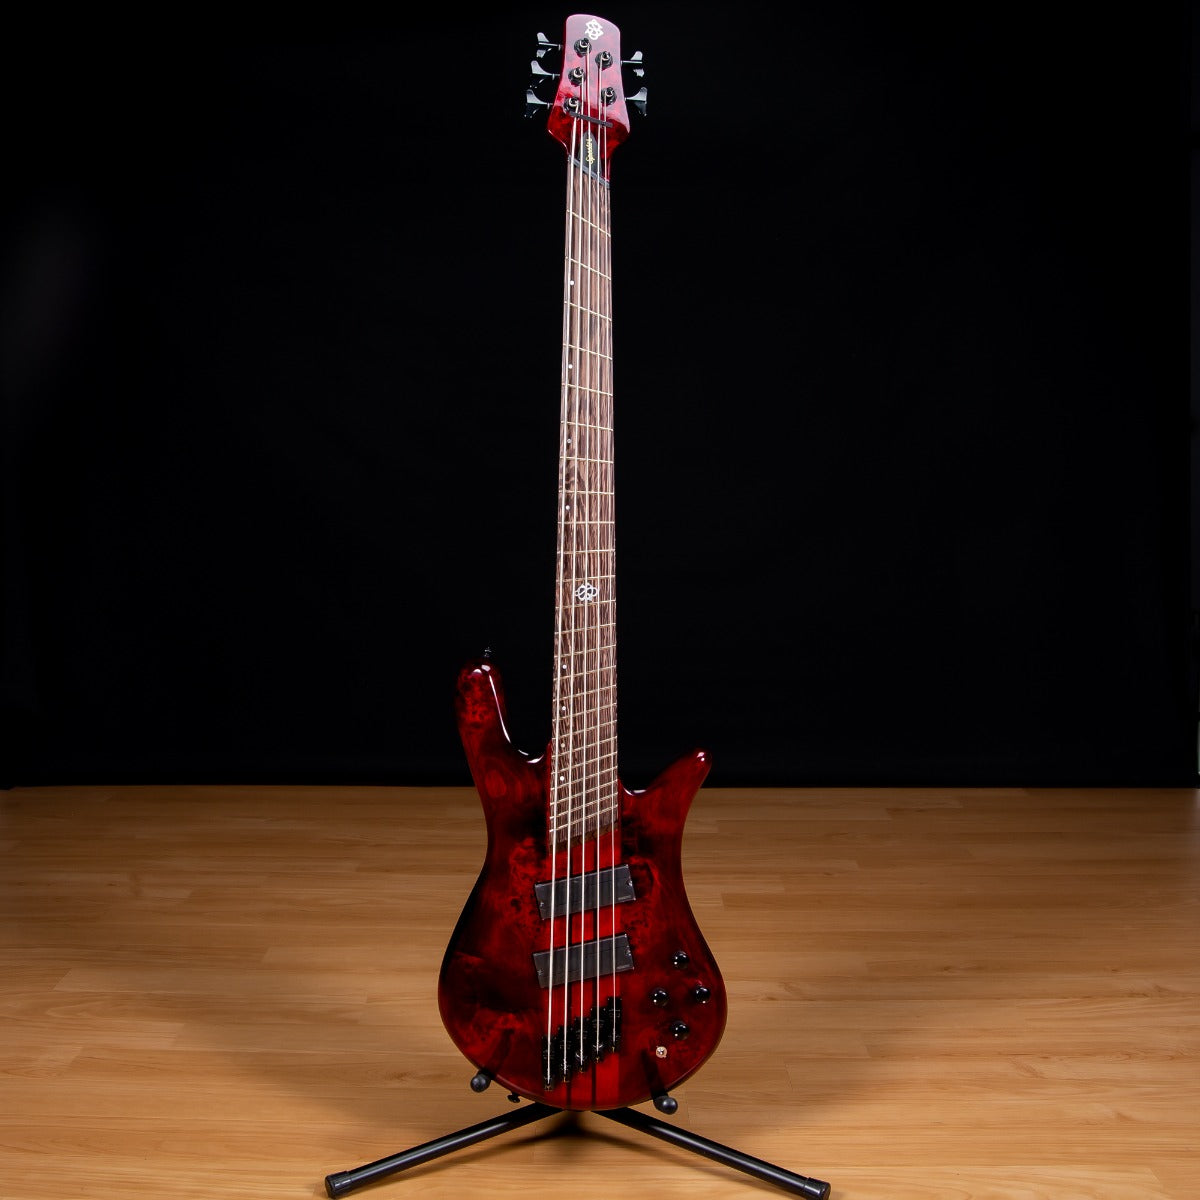 Spector NS Dimension 5 Bass Guitar - Inferno Red Gloss view 2